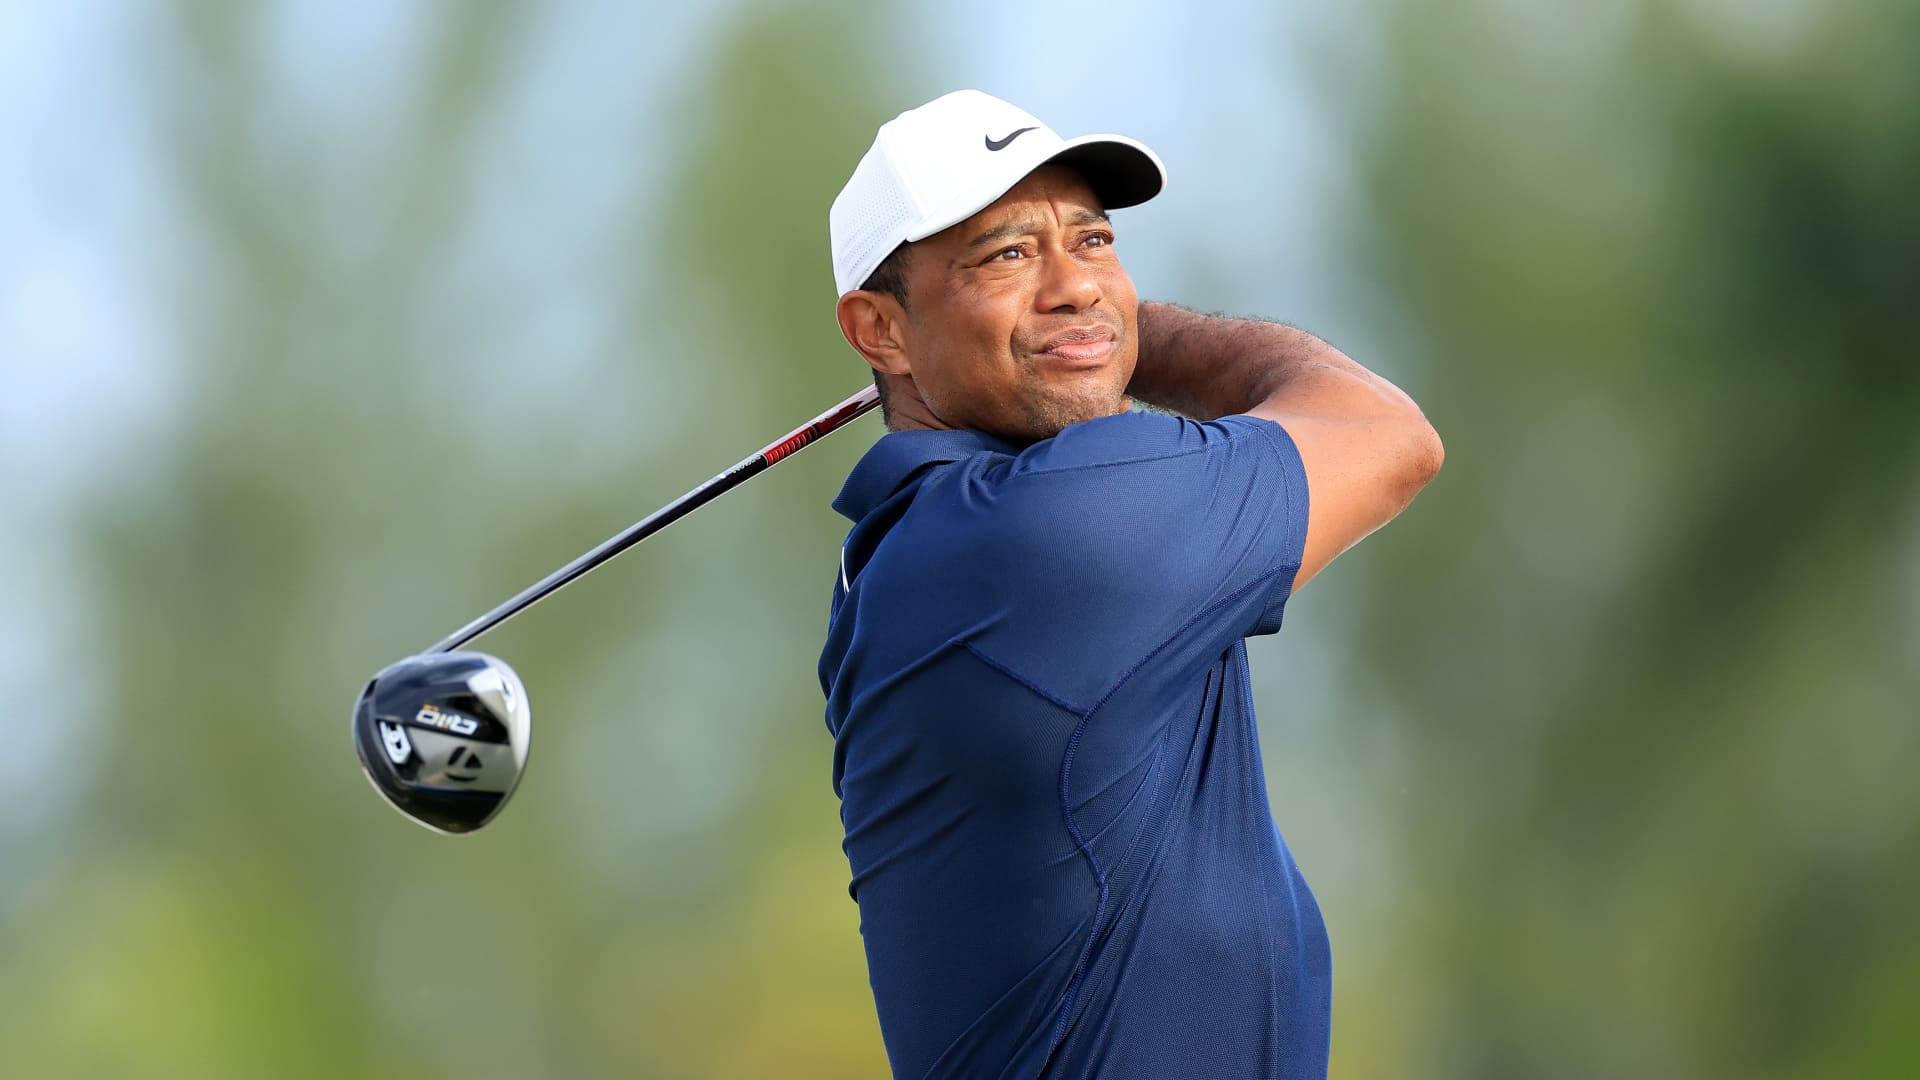 Tiger Woods has ended his collaboration with Nike after 27 years